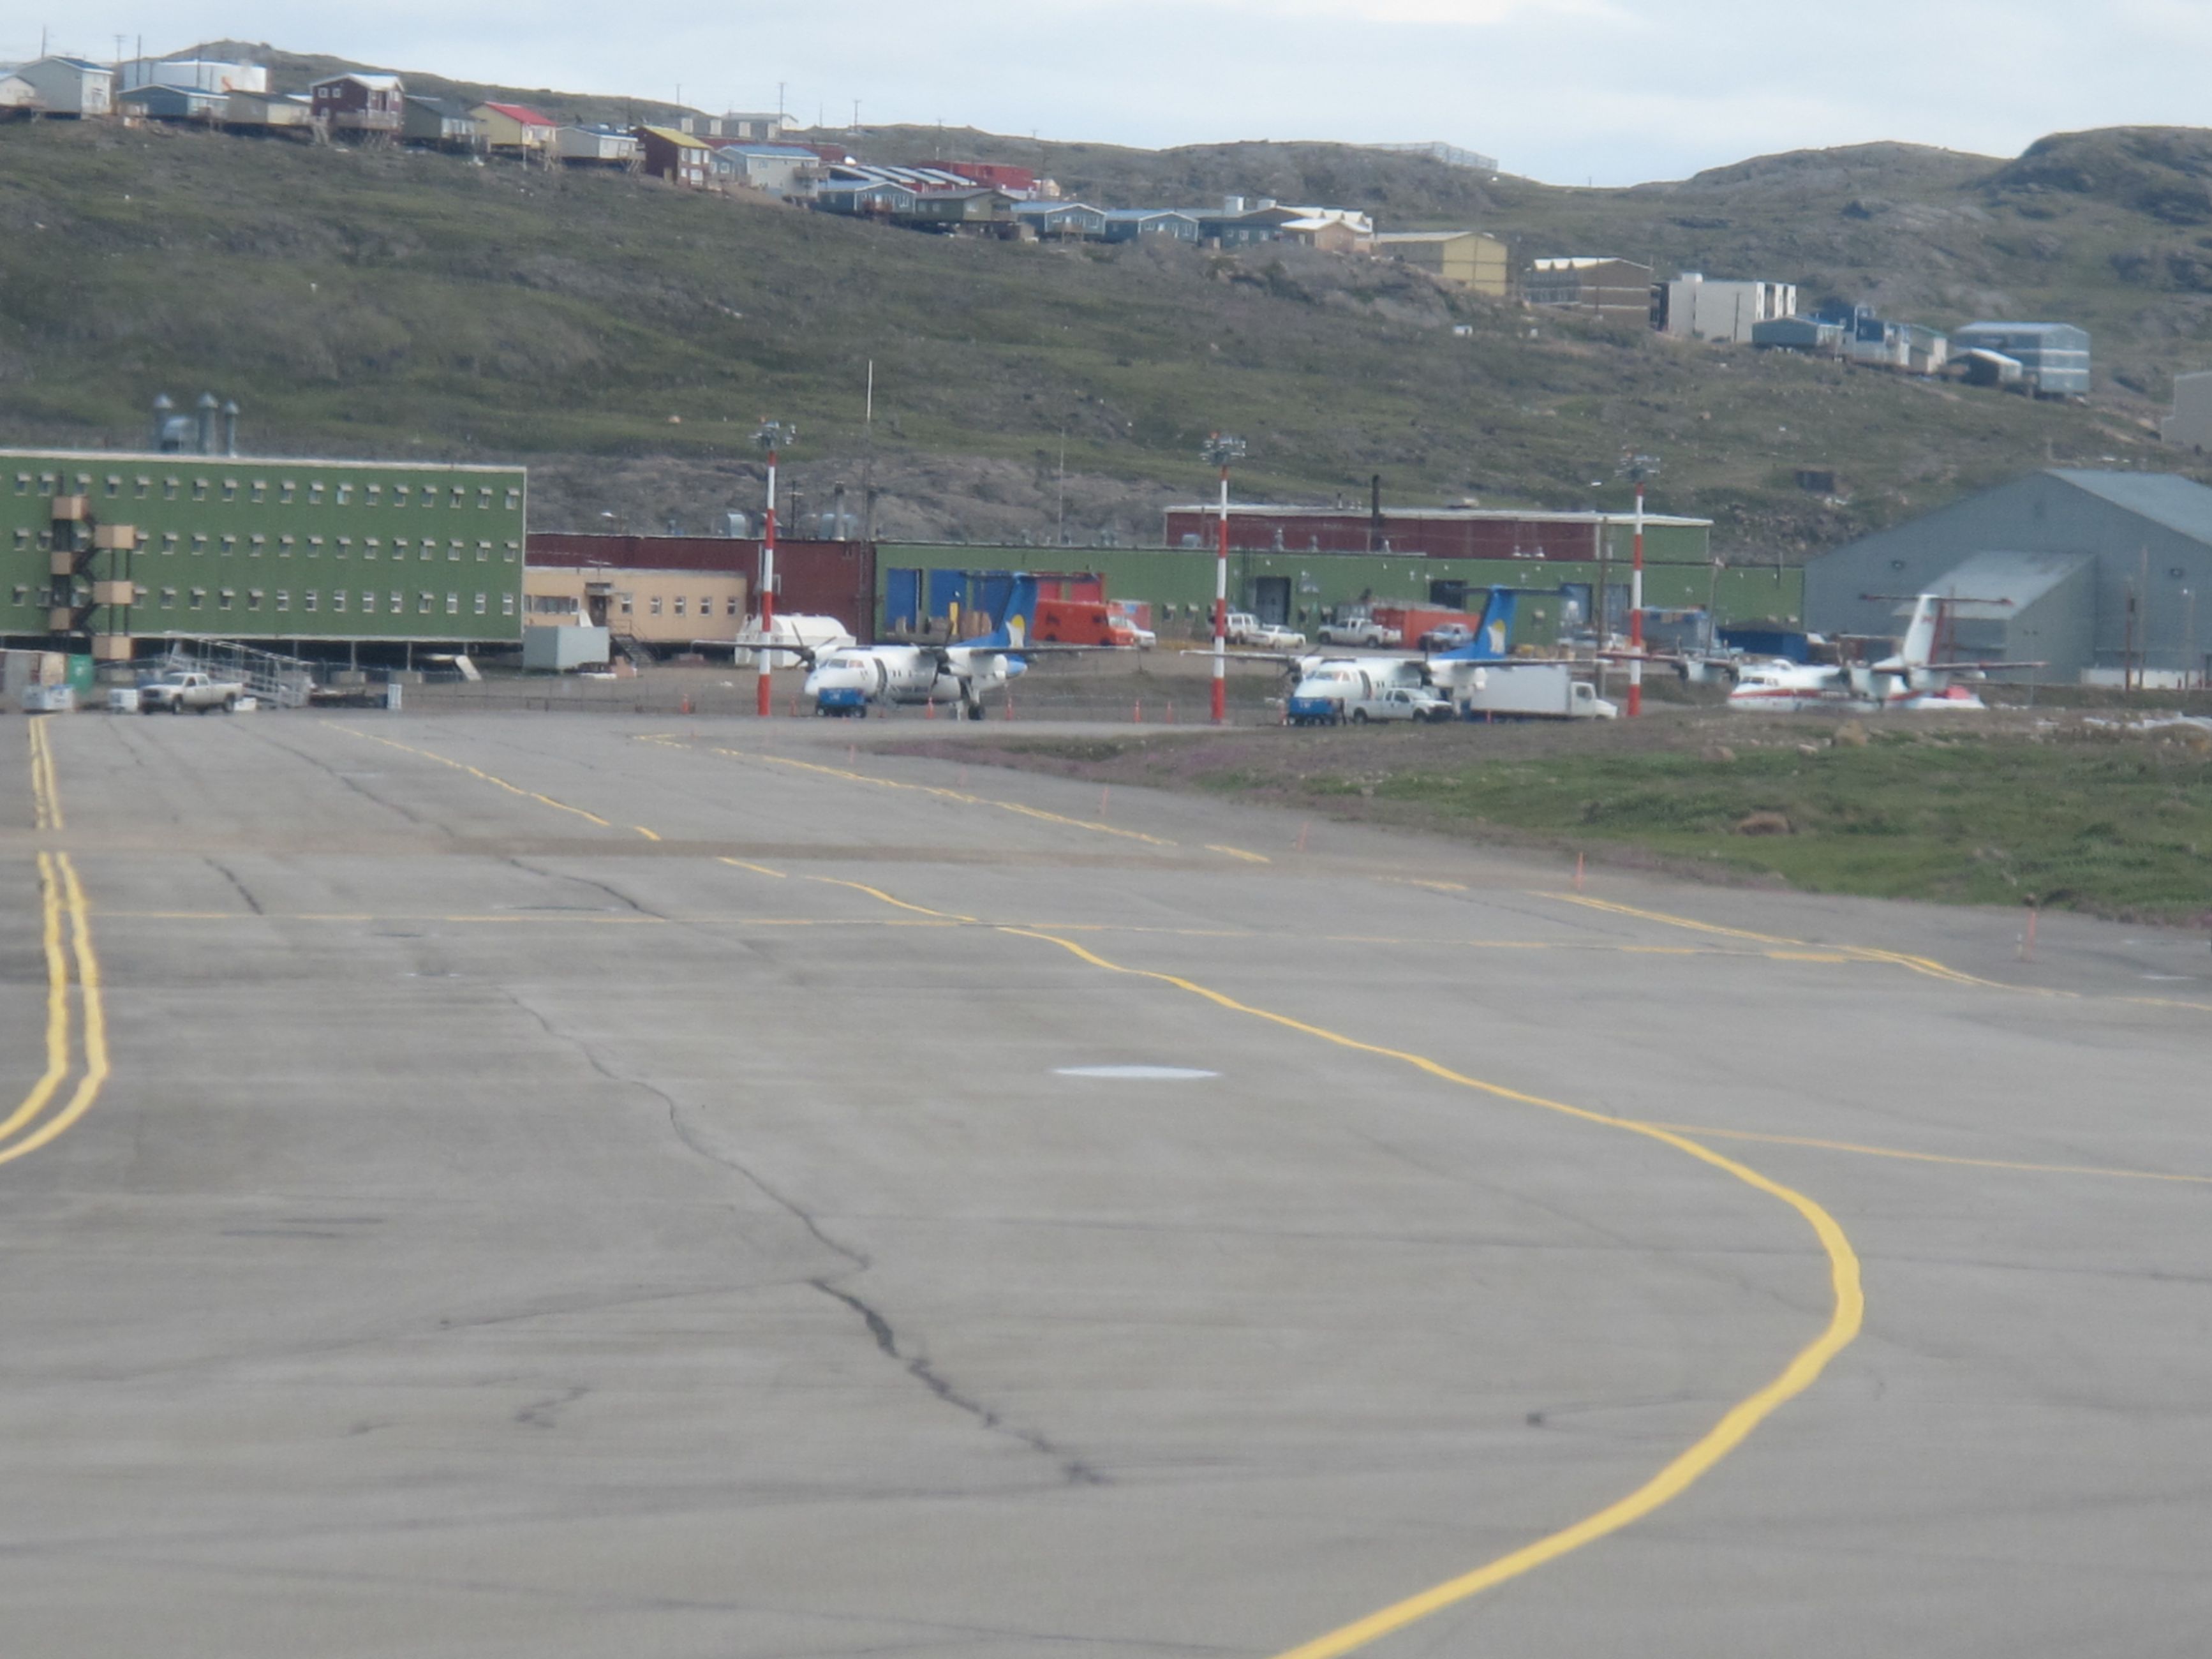 Image showing damage caused by permafrost thaw at the Iqaluit International Airport